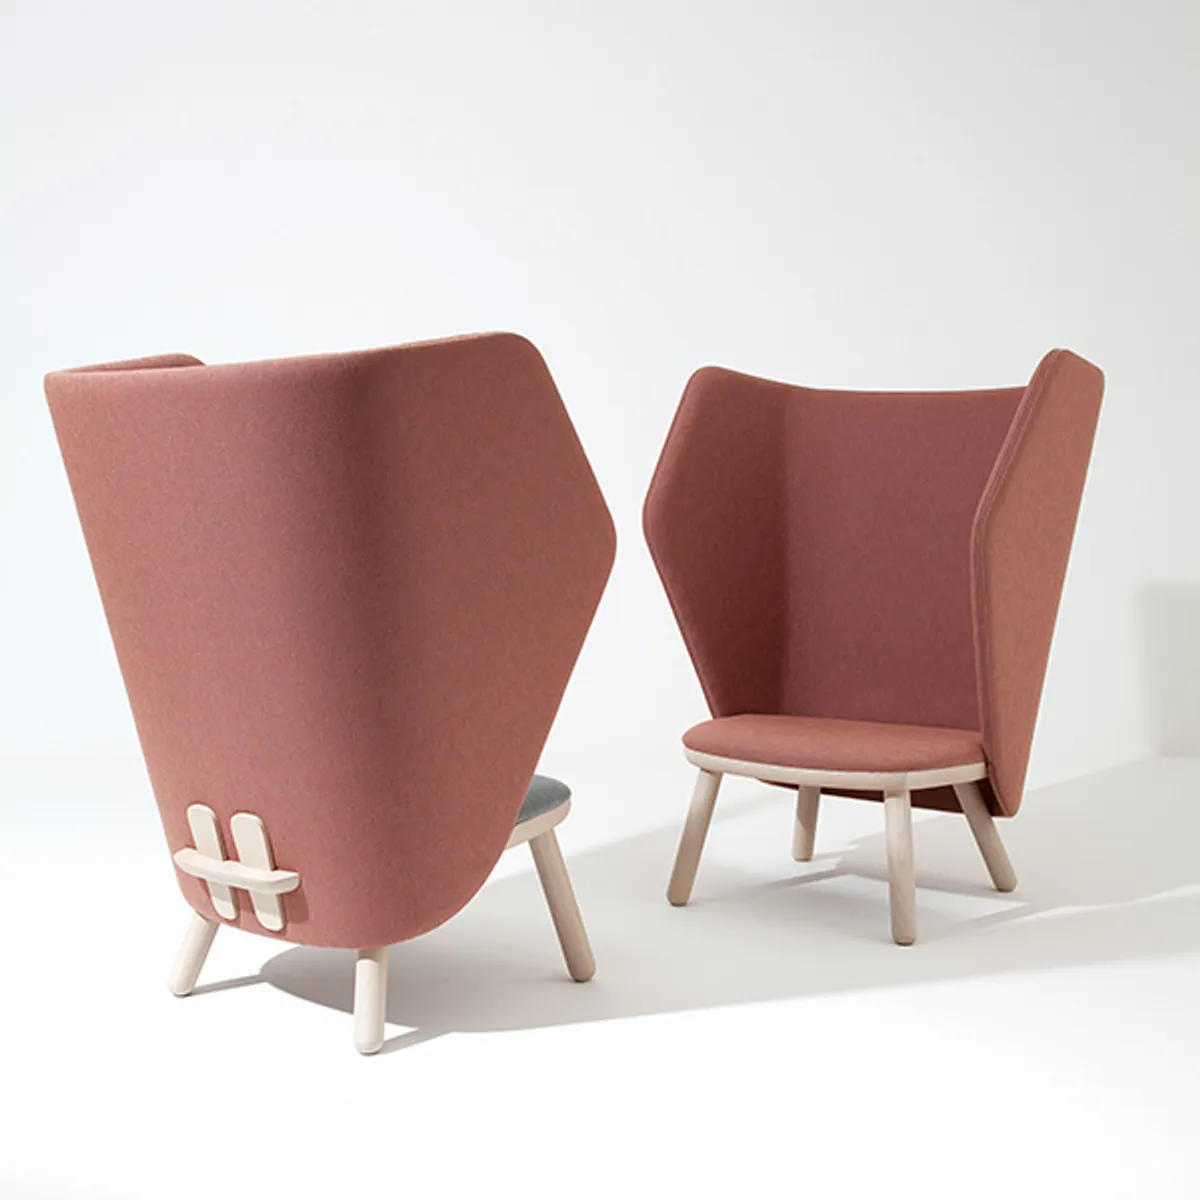 Ikkoku Lounge Chair Situ Private Pod Chair Inside Out Contracts